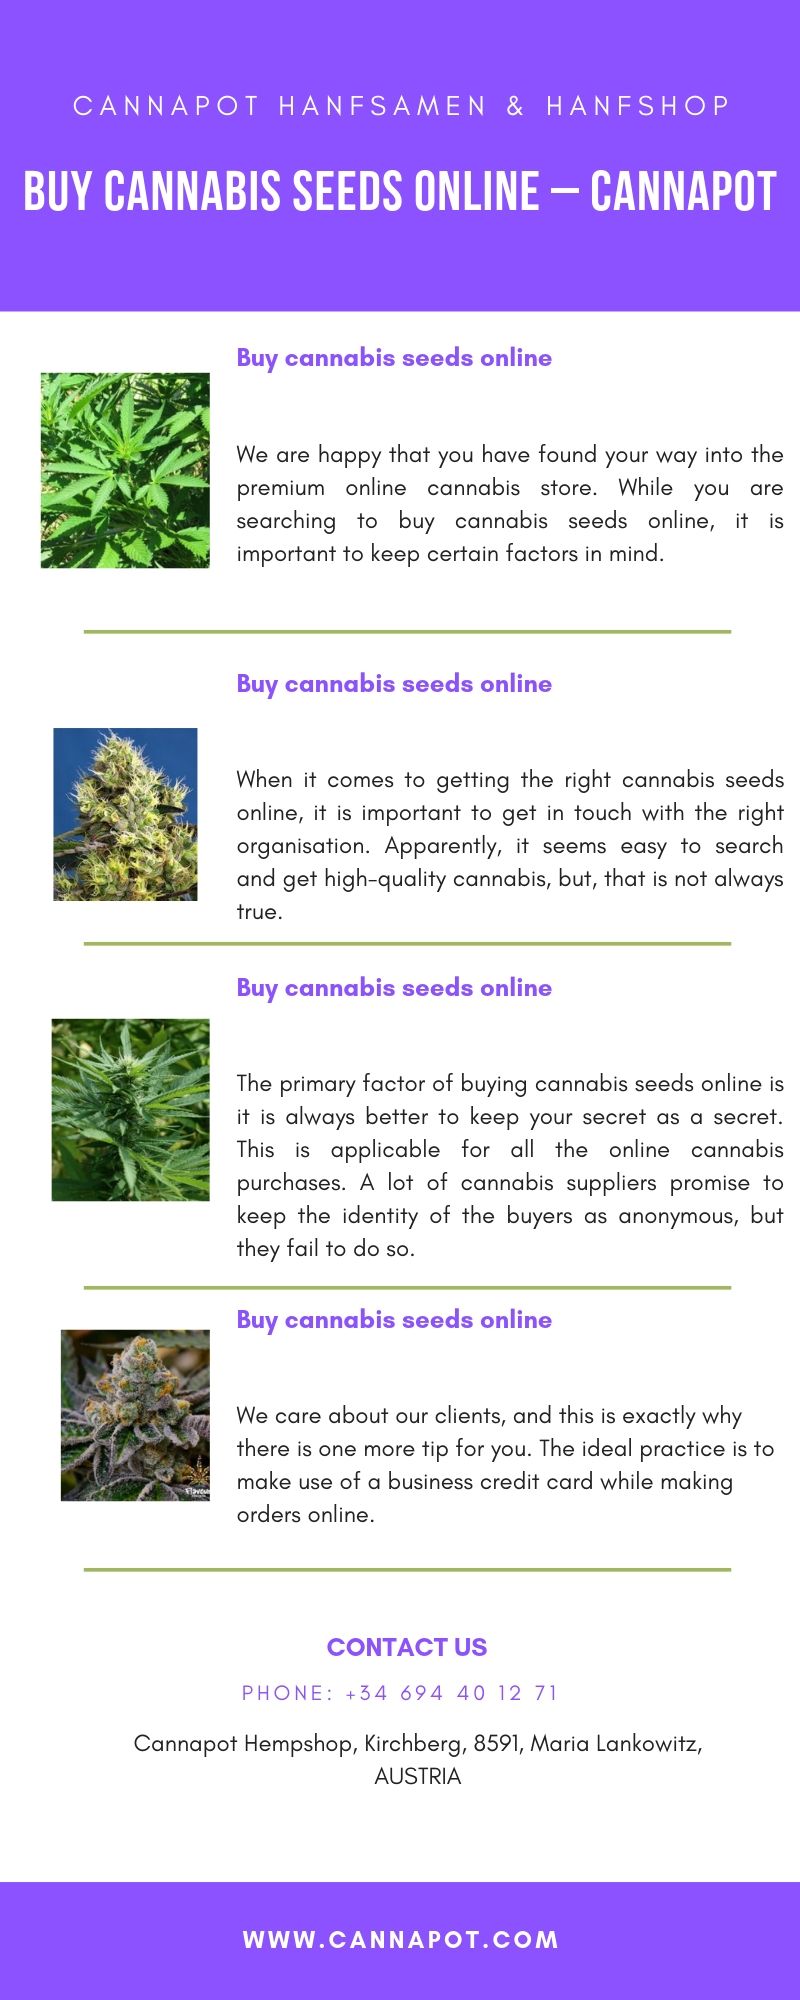 Buy cannabis seeds online - Cannapot.jpg  by Cannapot